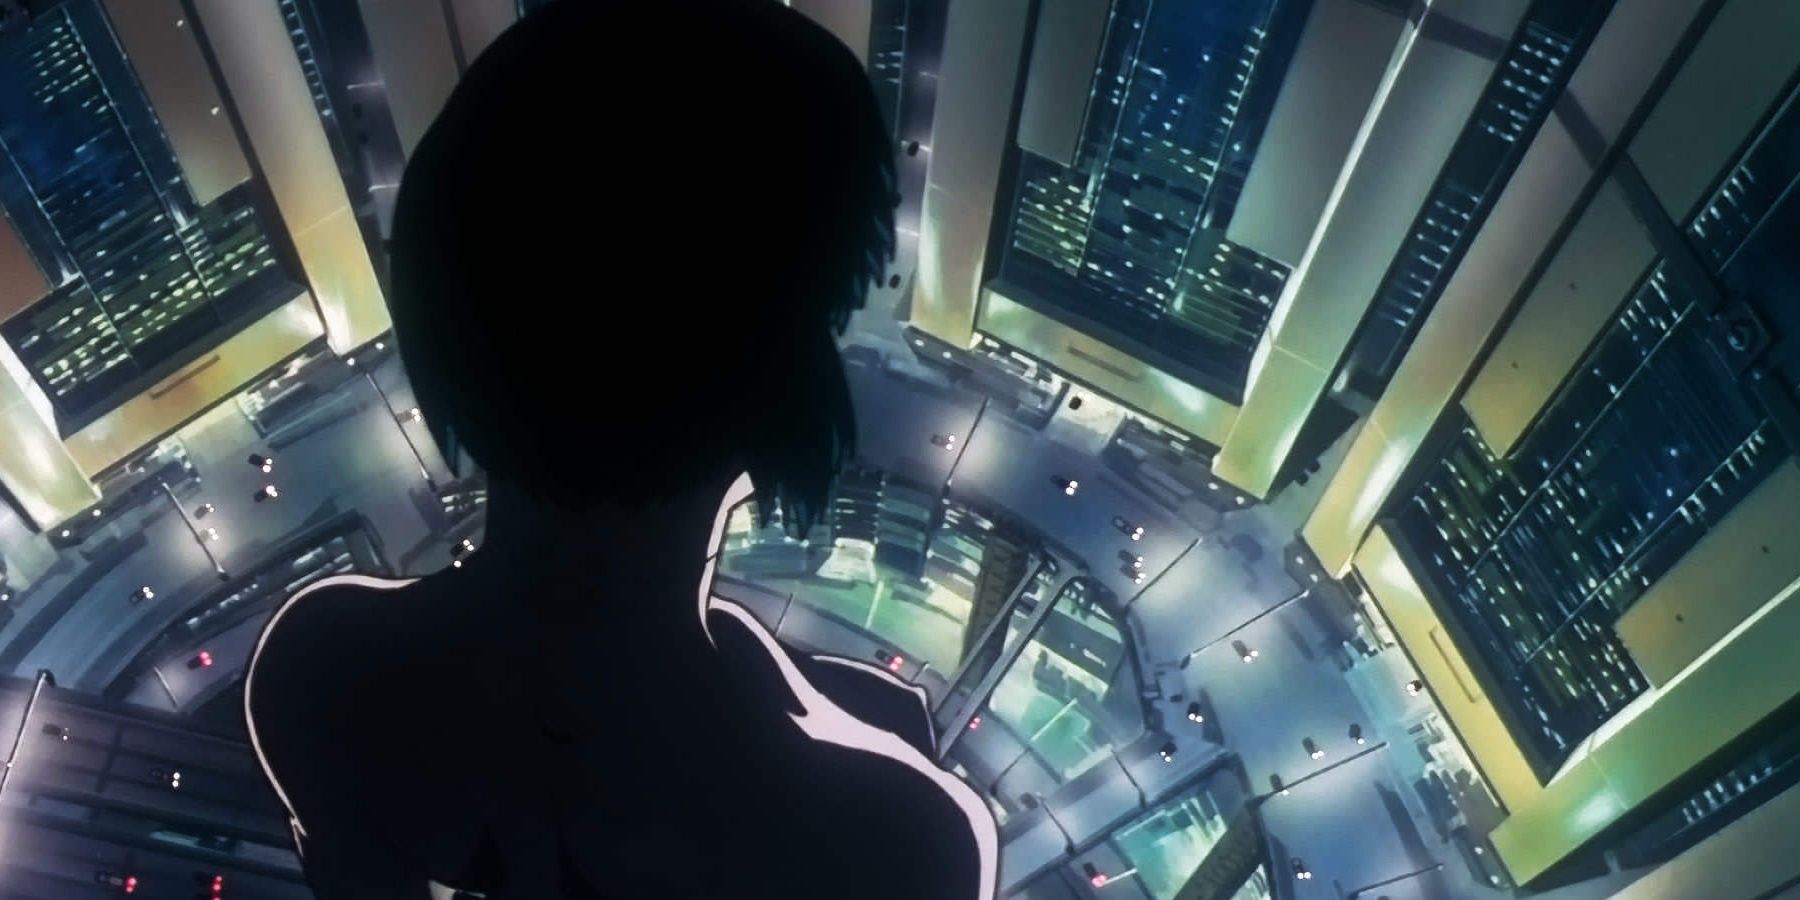 Kusanagi stands above the city in Ghost in the Shell